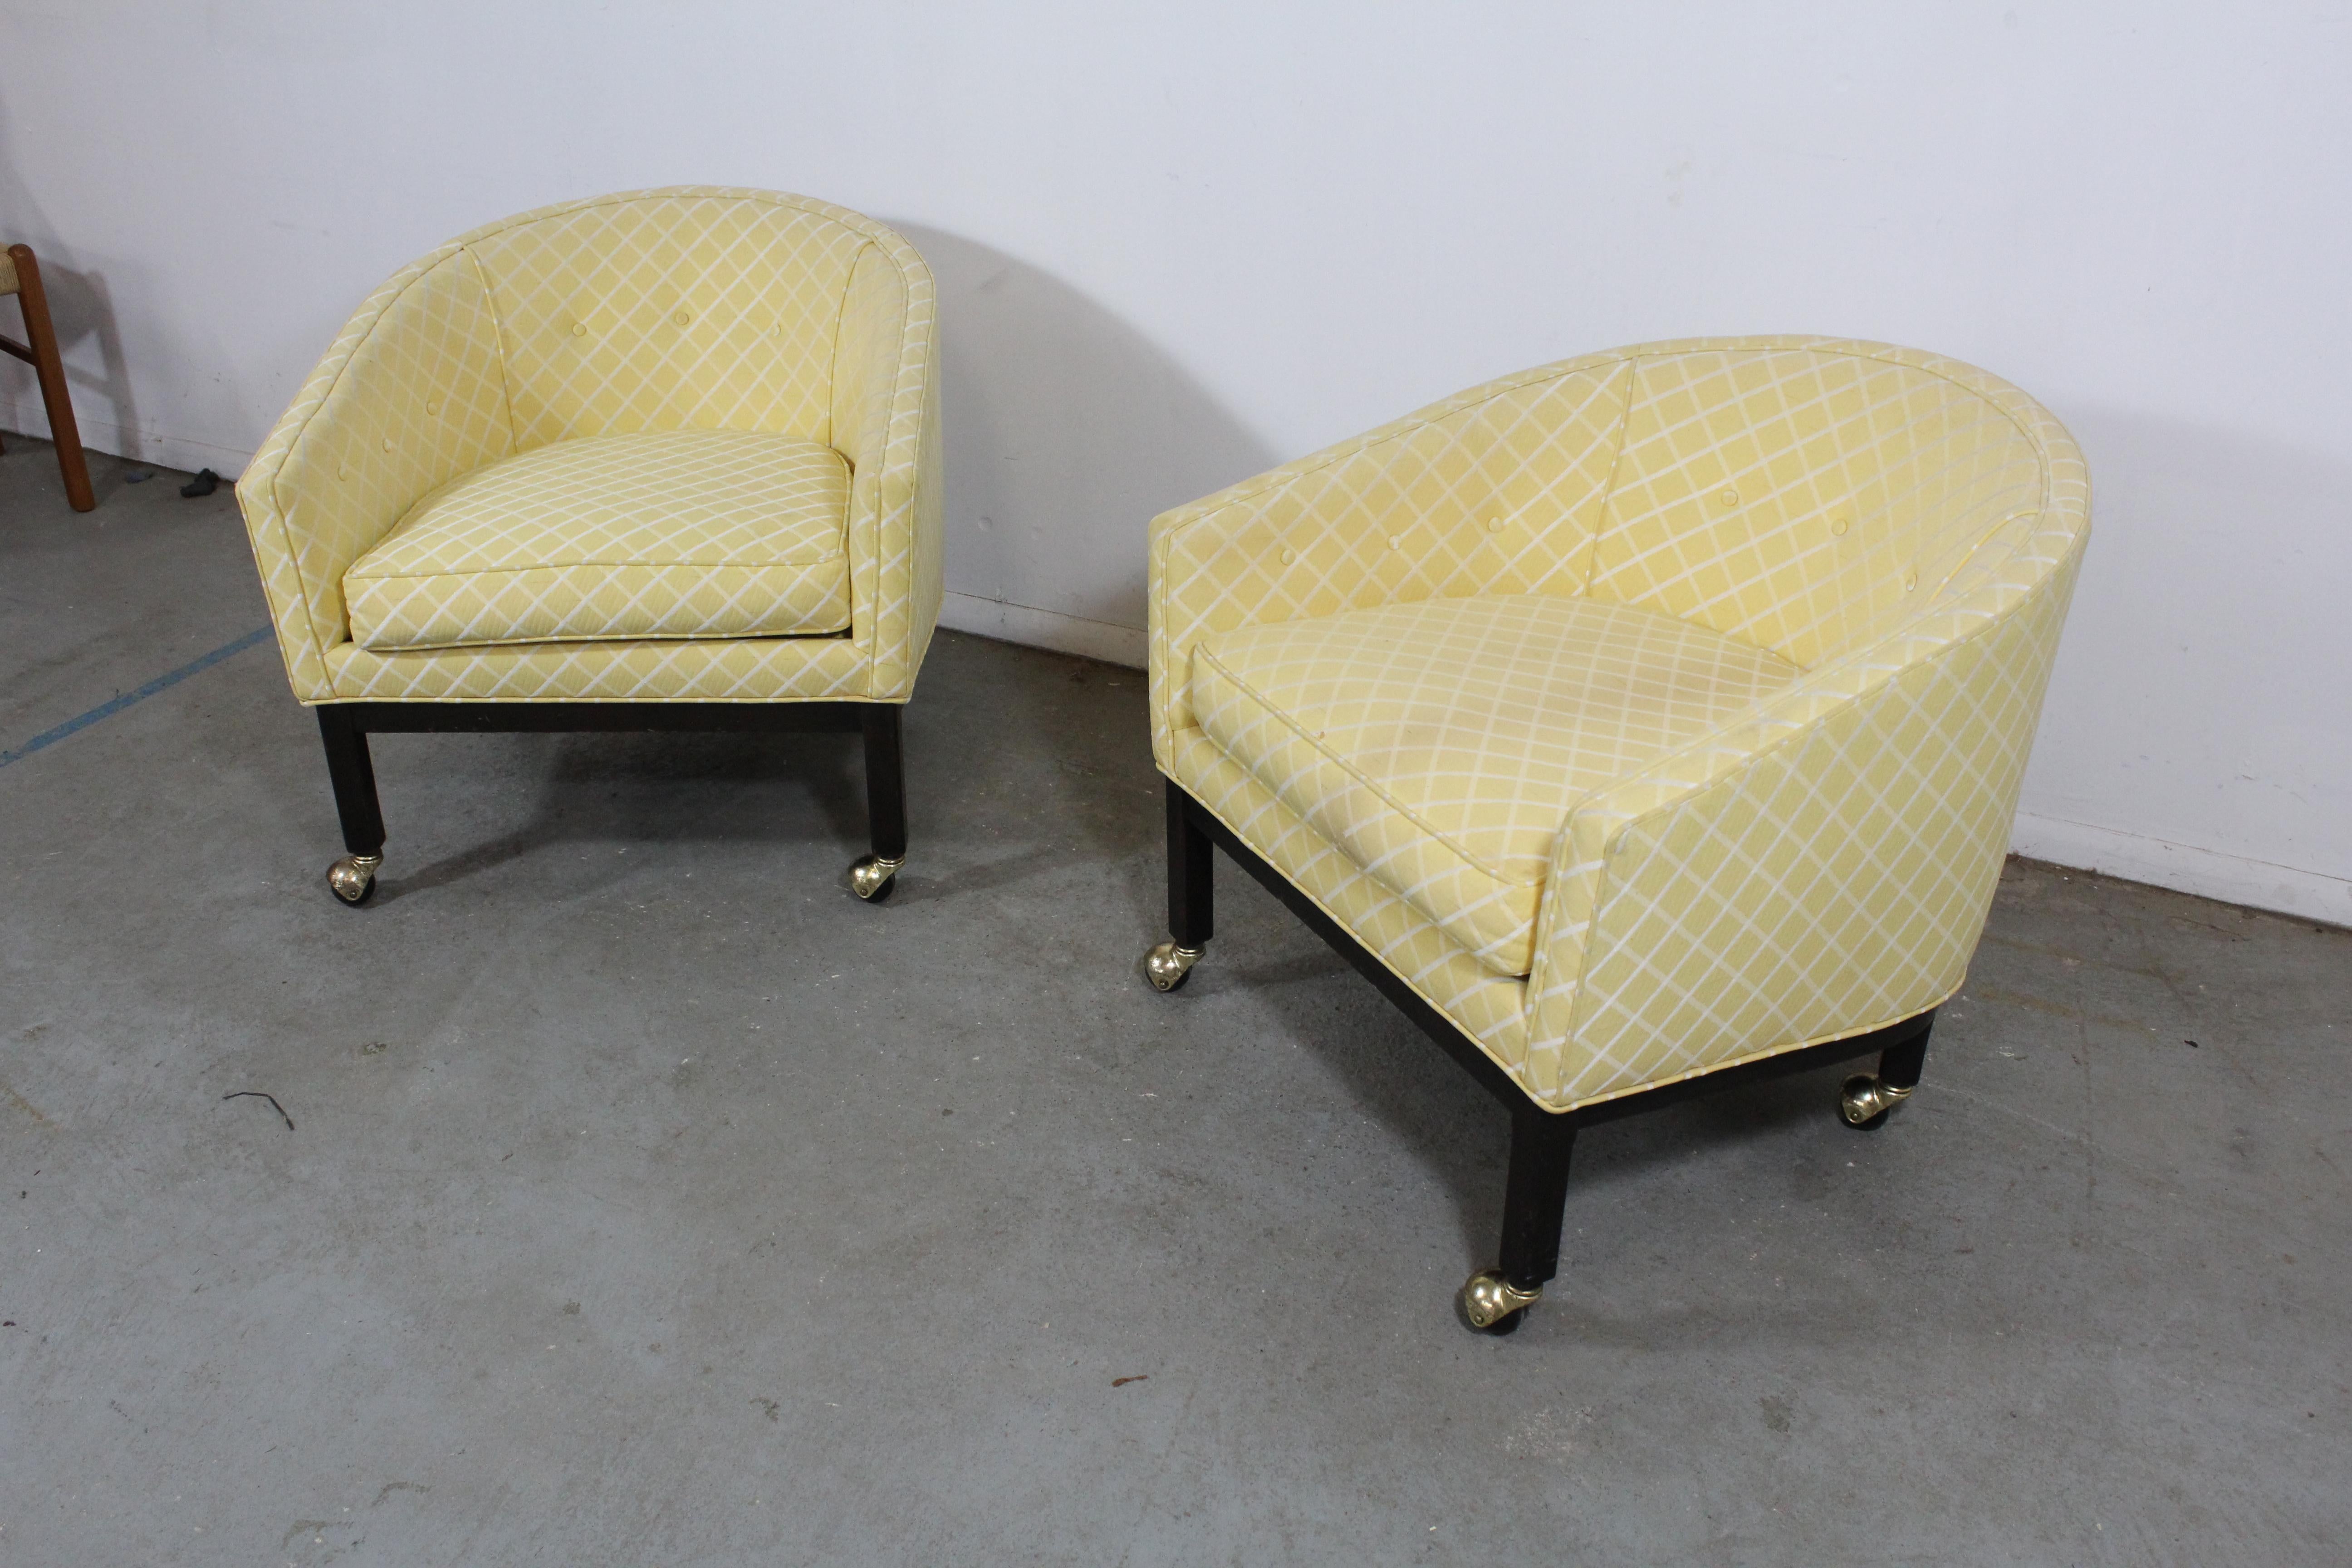 Pair of Mid-Century Modern club chairs by Kipp Stewart for Directional

What a find. Offered is a pair of club chairs on rollers by Kipp Stewart. They are unsigned. These two chairs are on rollers and their springs have been repaired. The